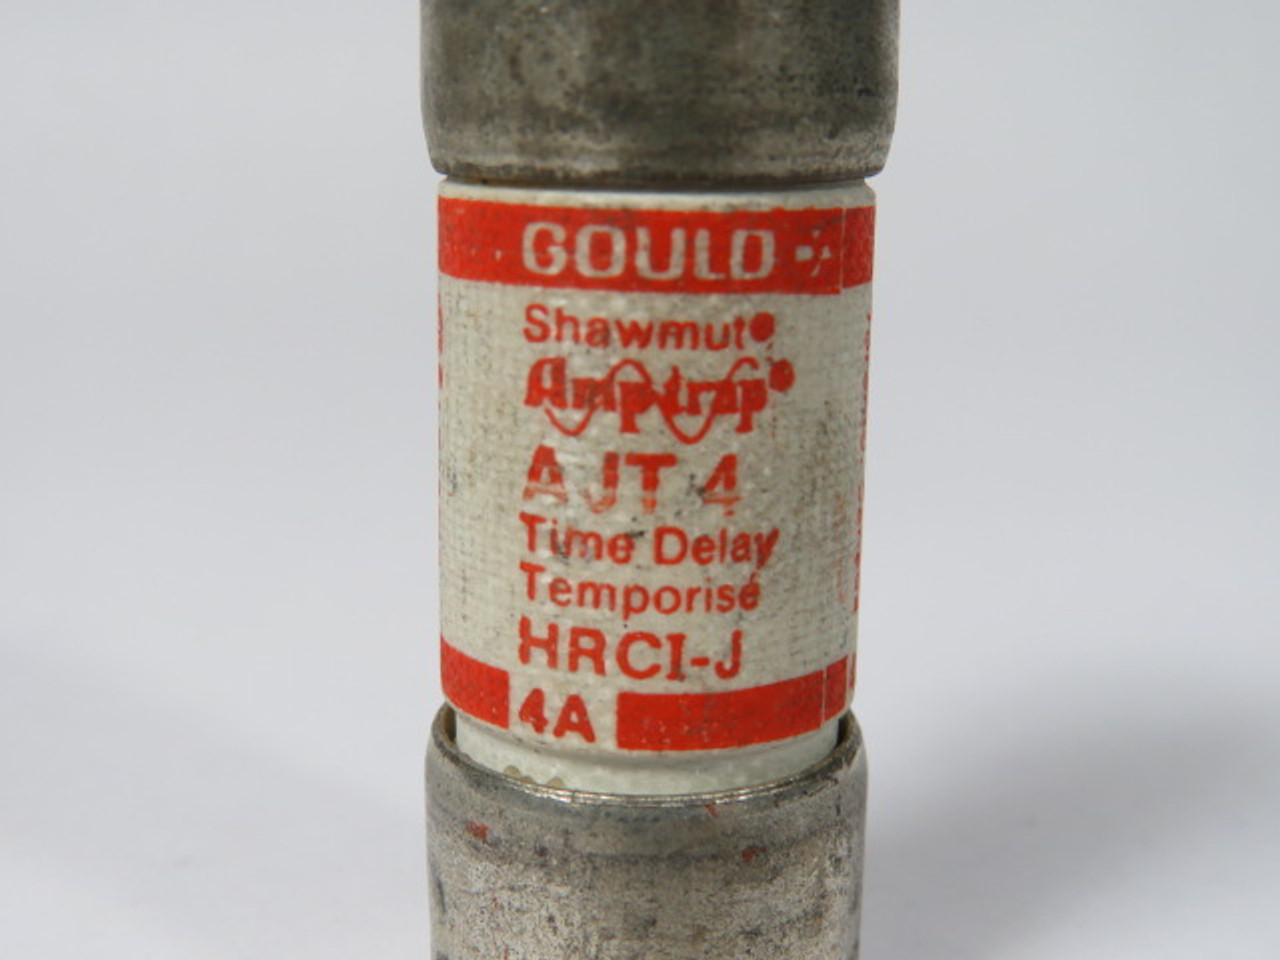 Gould Shawmut AJT4 Time Delay Fuse 4A 600V USED